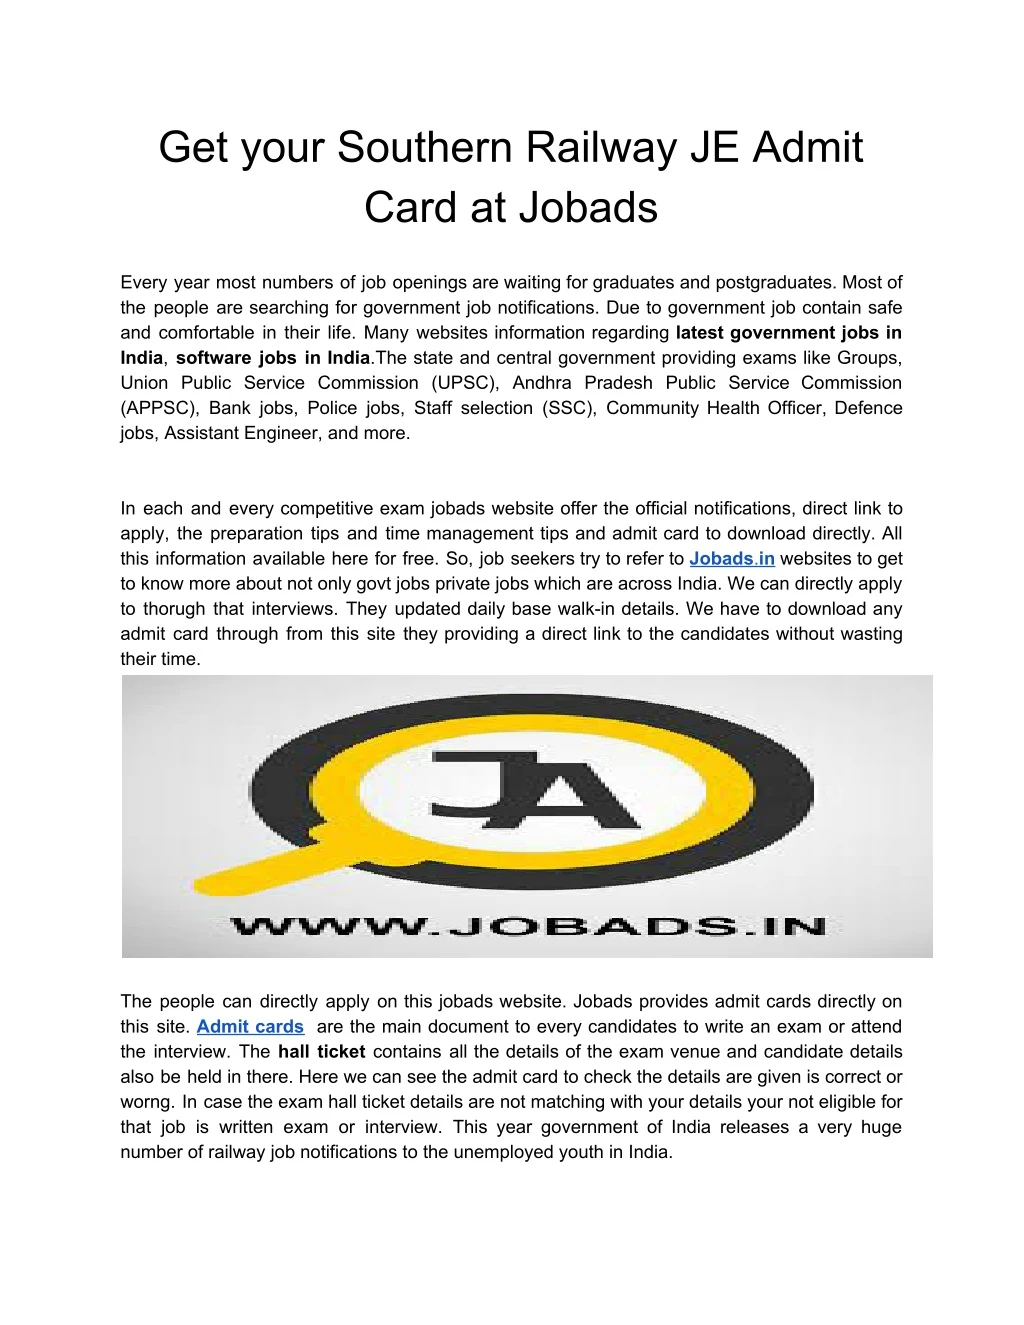 get your southern railway je admit card at jobads